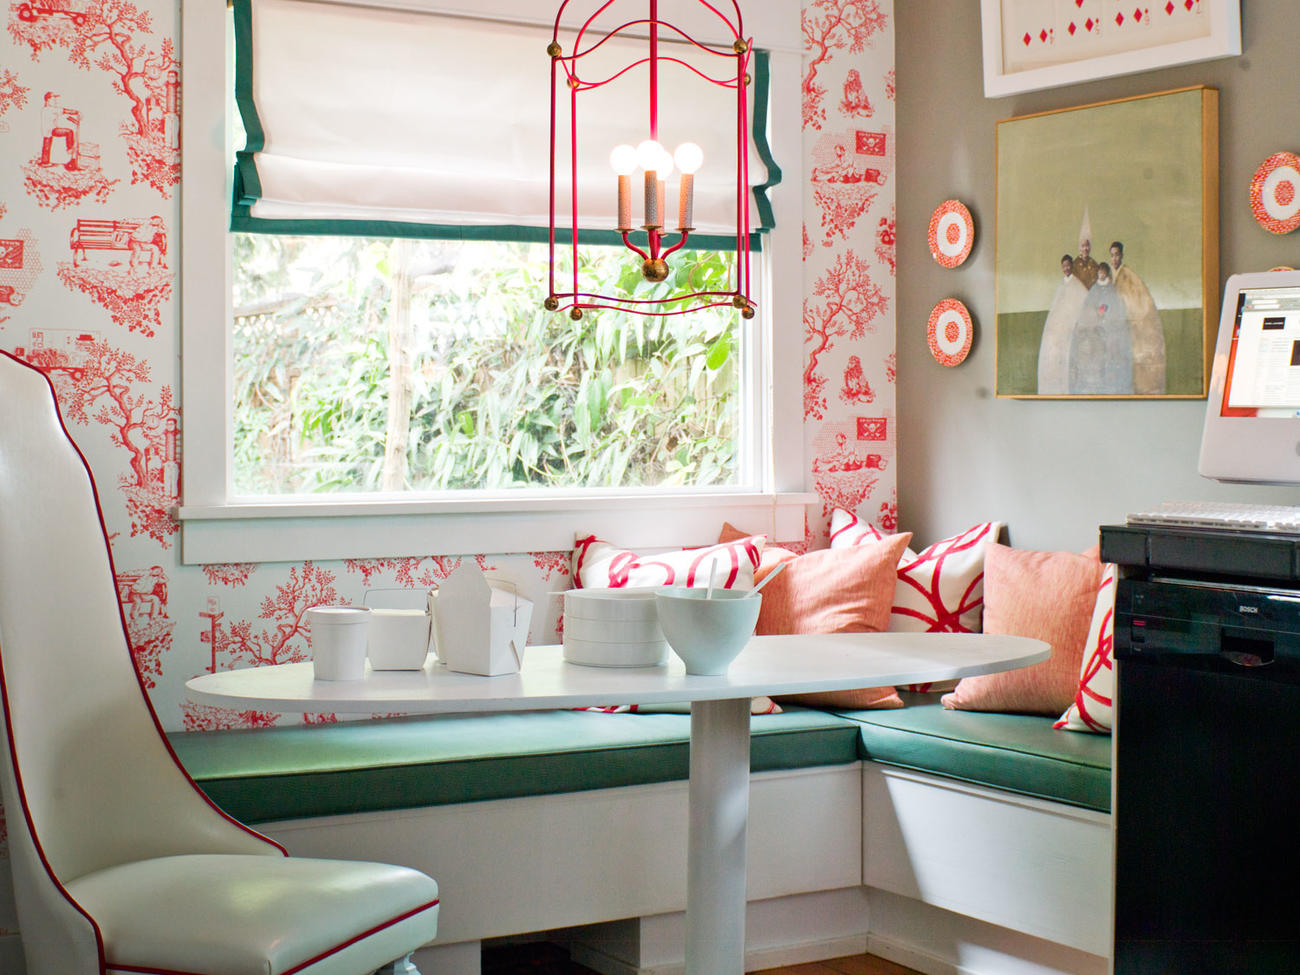 7 Ways to Decorate with Pink